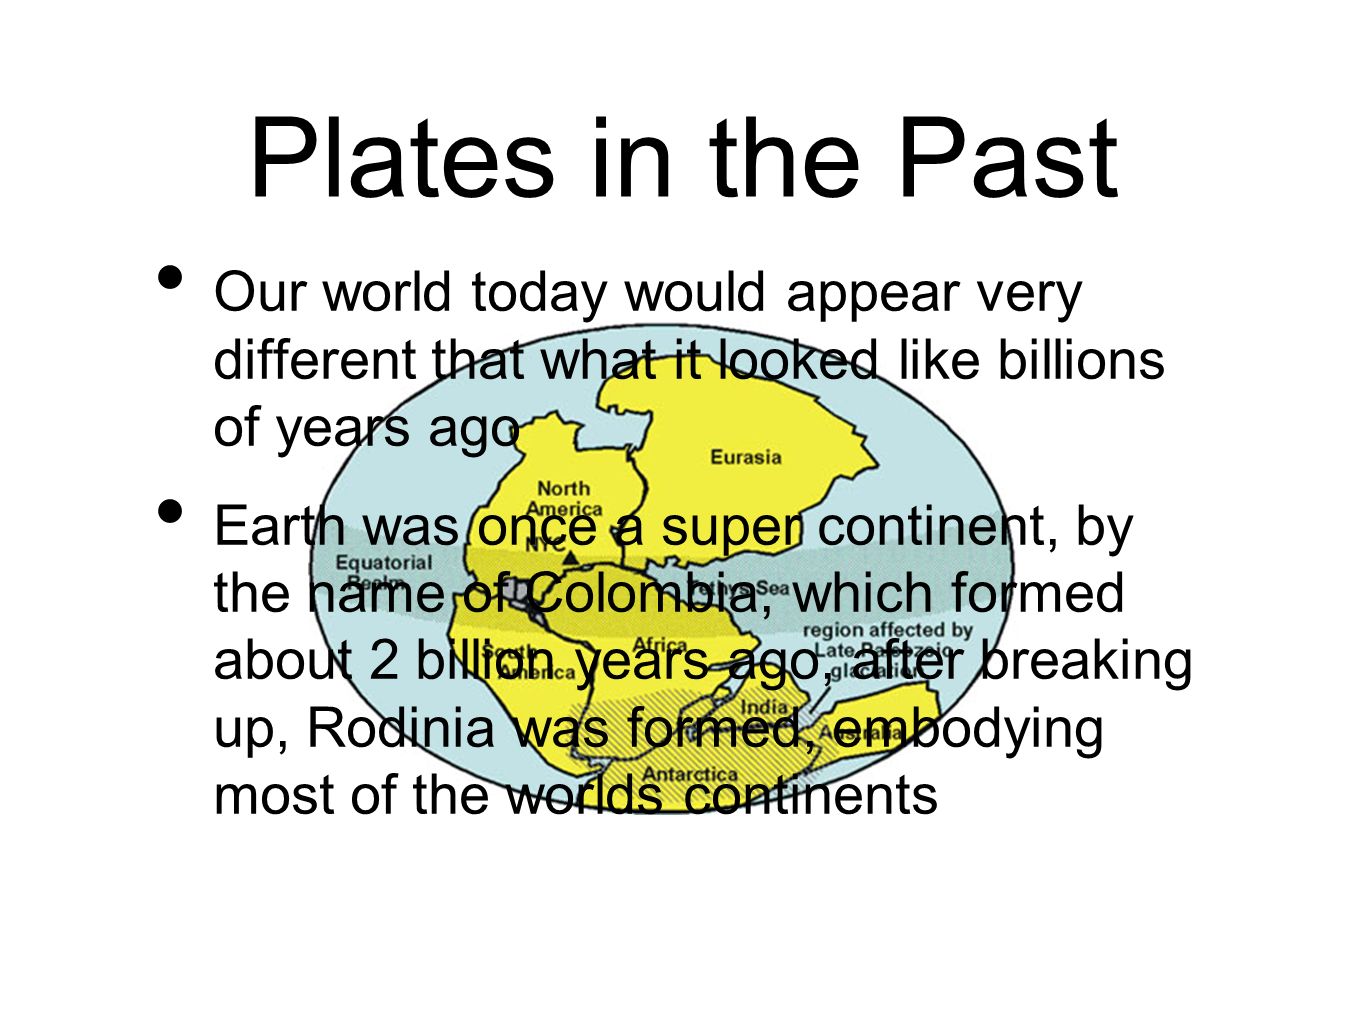 Plates in the Past Our world today would appear very different that what it looked like billions of years ago Earth was once a super continent, by the name of Colombia, which formed about 2 billion years ago, after breaking up, Rodinia was formed, embodying most of the worlds continents